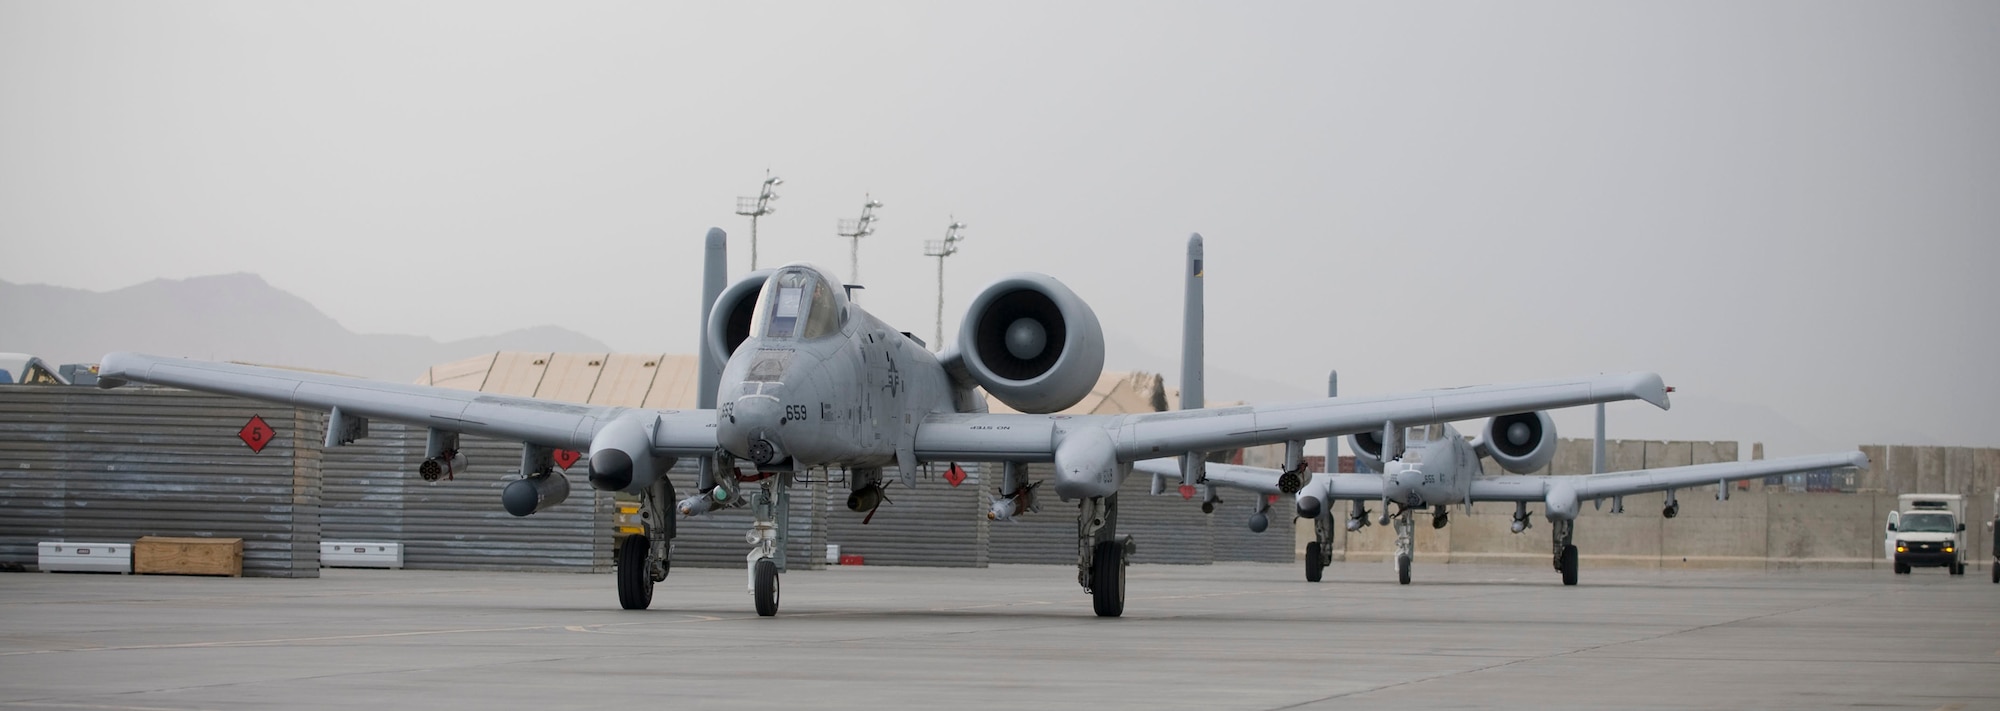 BAGRAM AIR FIELD, Afghanistan -- Two A-10 Thunderbolt II jets taxi out to the runway here on July 26, 2008. The jets are experts at close air support missions and have proven to be invaluable despite being well past their expected useful lifespan. (U.S. Air Force photo by Staff Sgt. Samuel Morse)